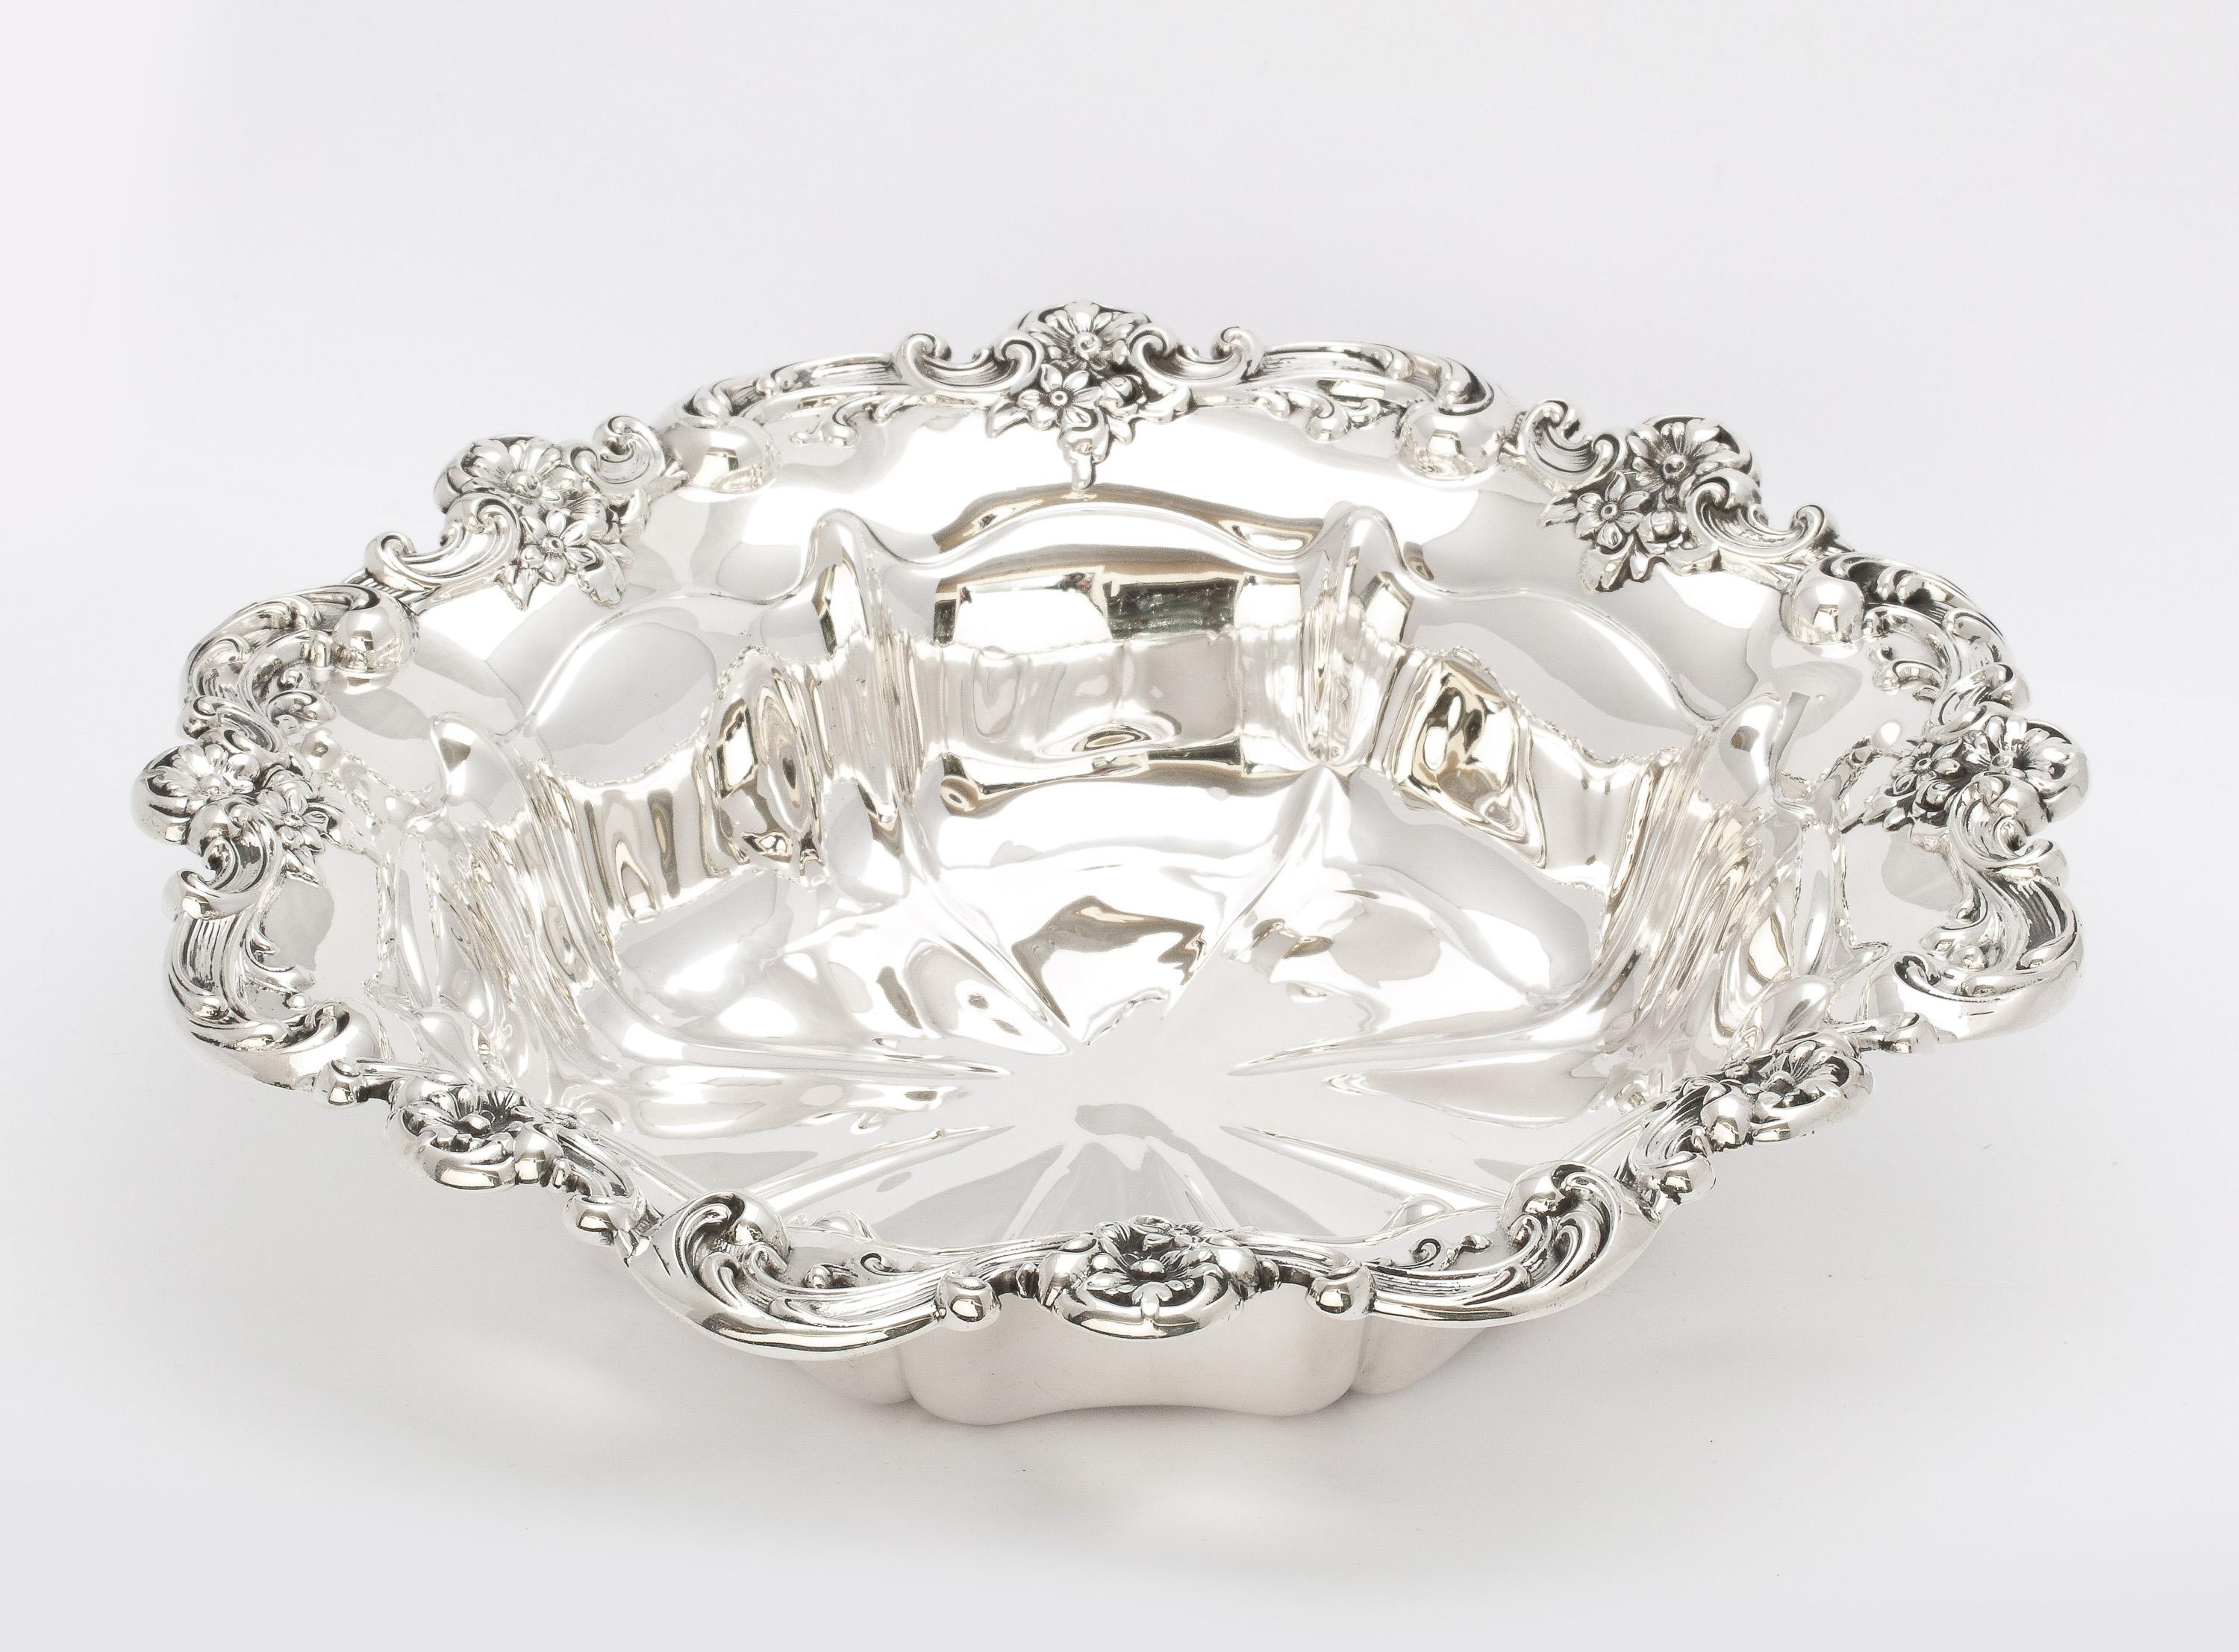 Beautiful Victorian-Style Sterling Silver Centerpiece Bowl By Gorham For Sale 11